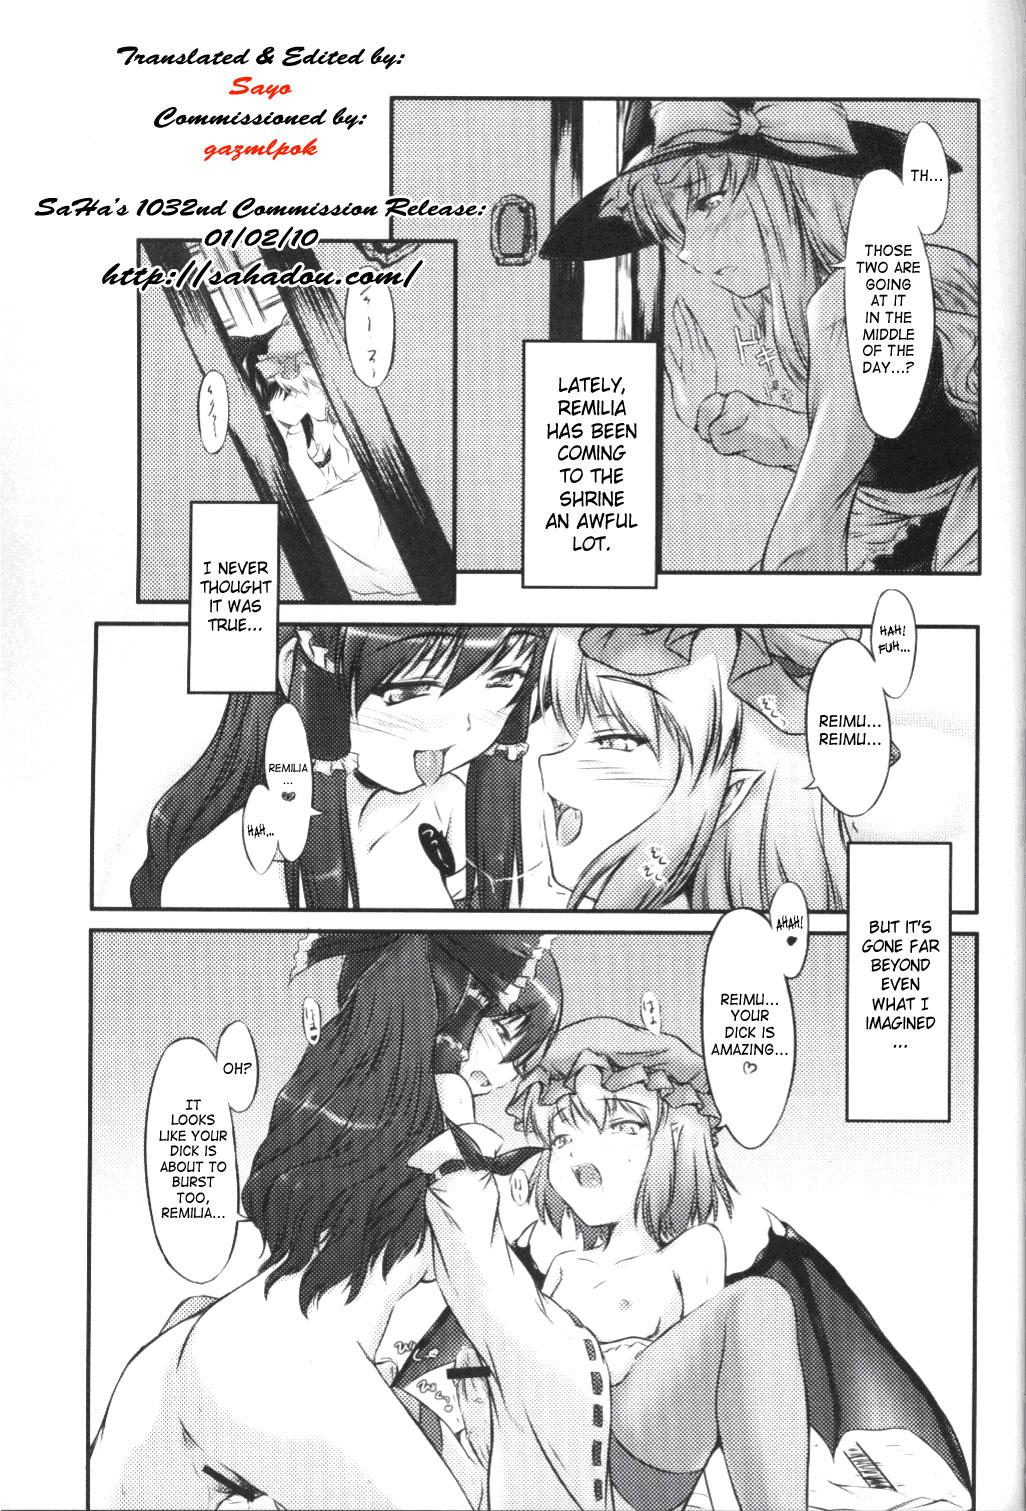 Cogiendo Shameless Girls - Touhou project Cocksucking - Page 4